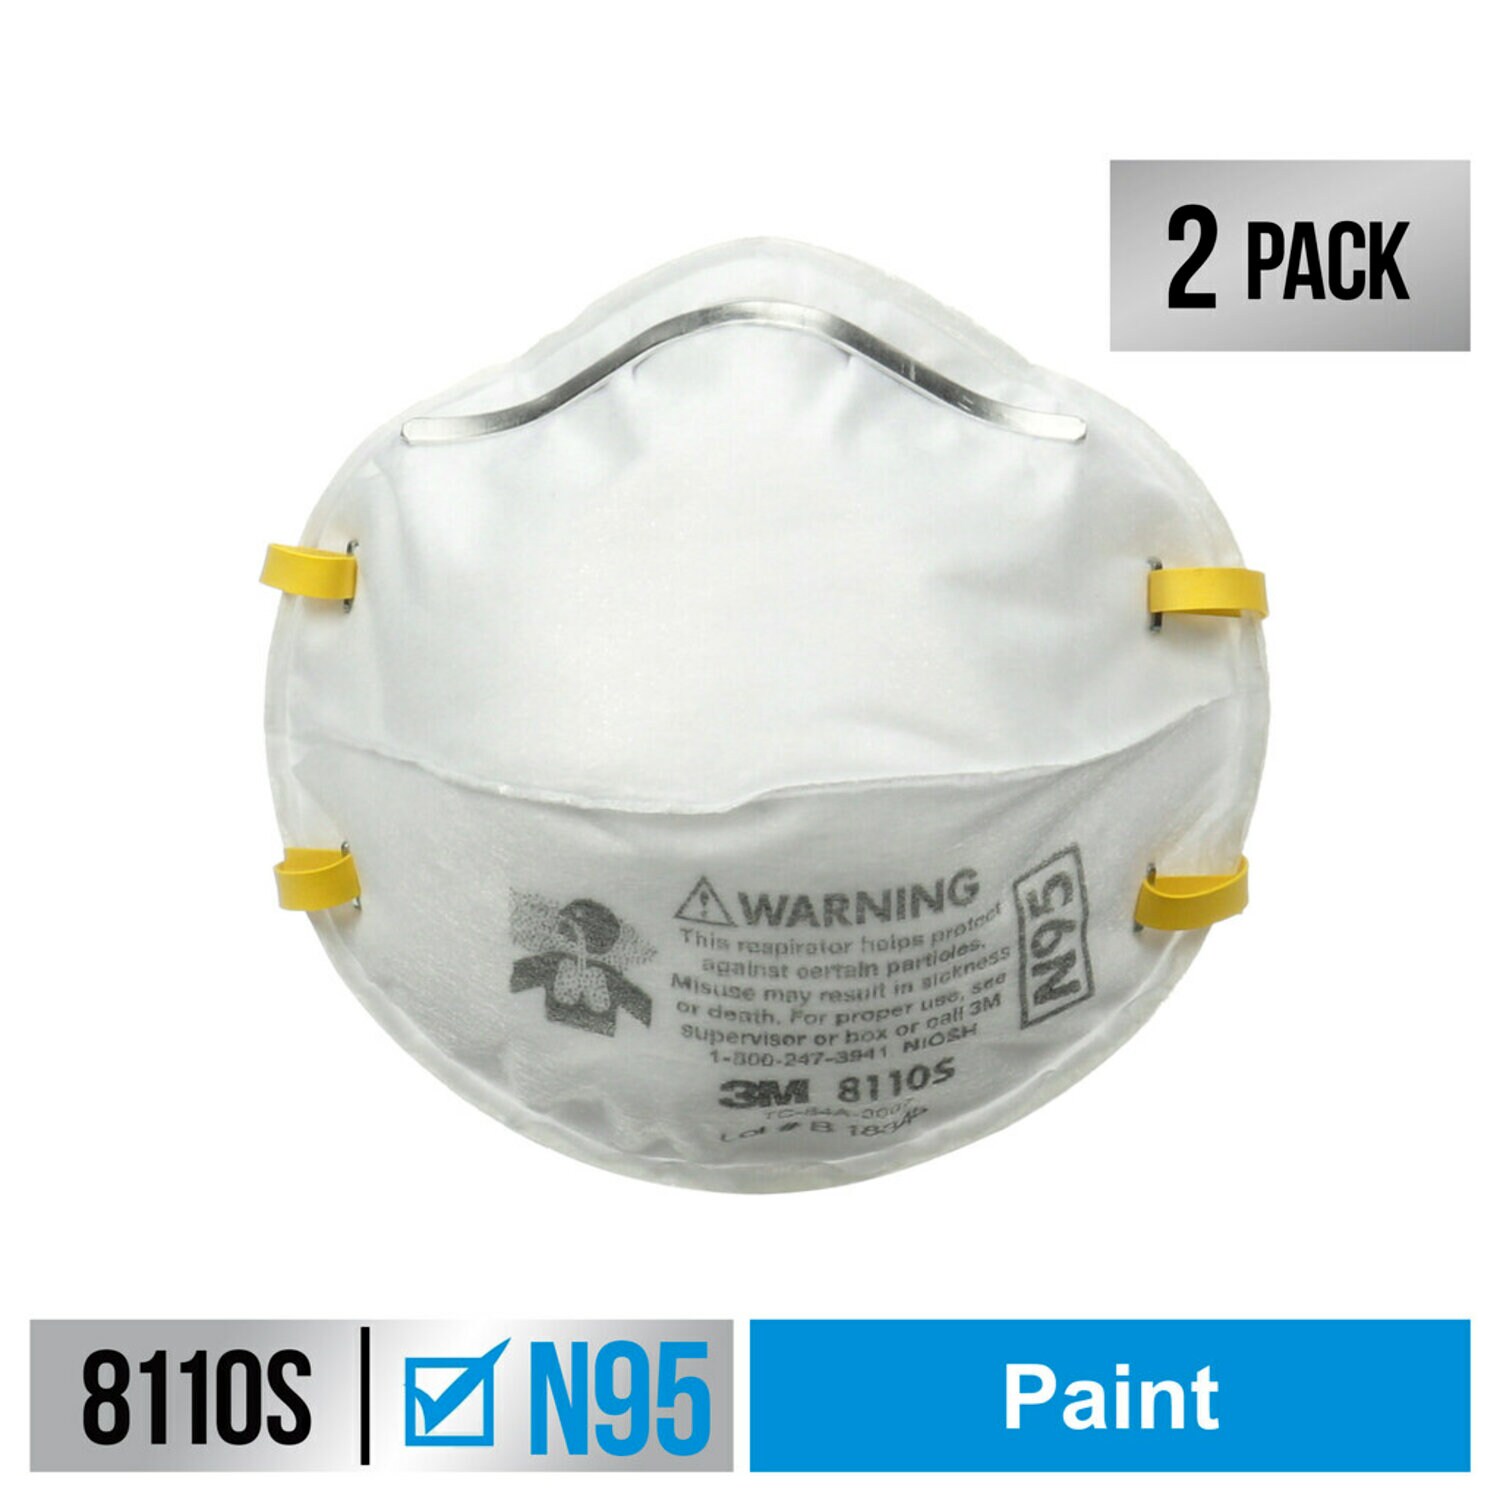 7100159426 - 3M Performance Paint Prep Respirator N95 Particulate, 8110SP2-DC, Size
Small, 2 eaches/pack, 12 packs/case